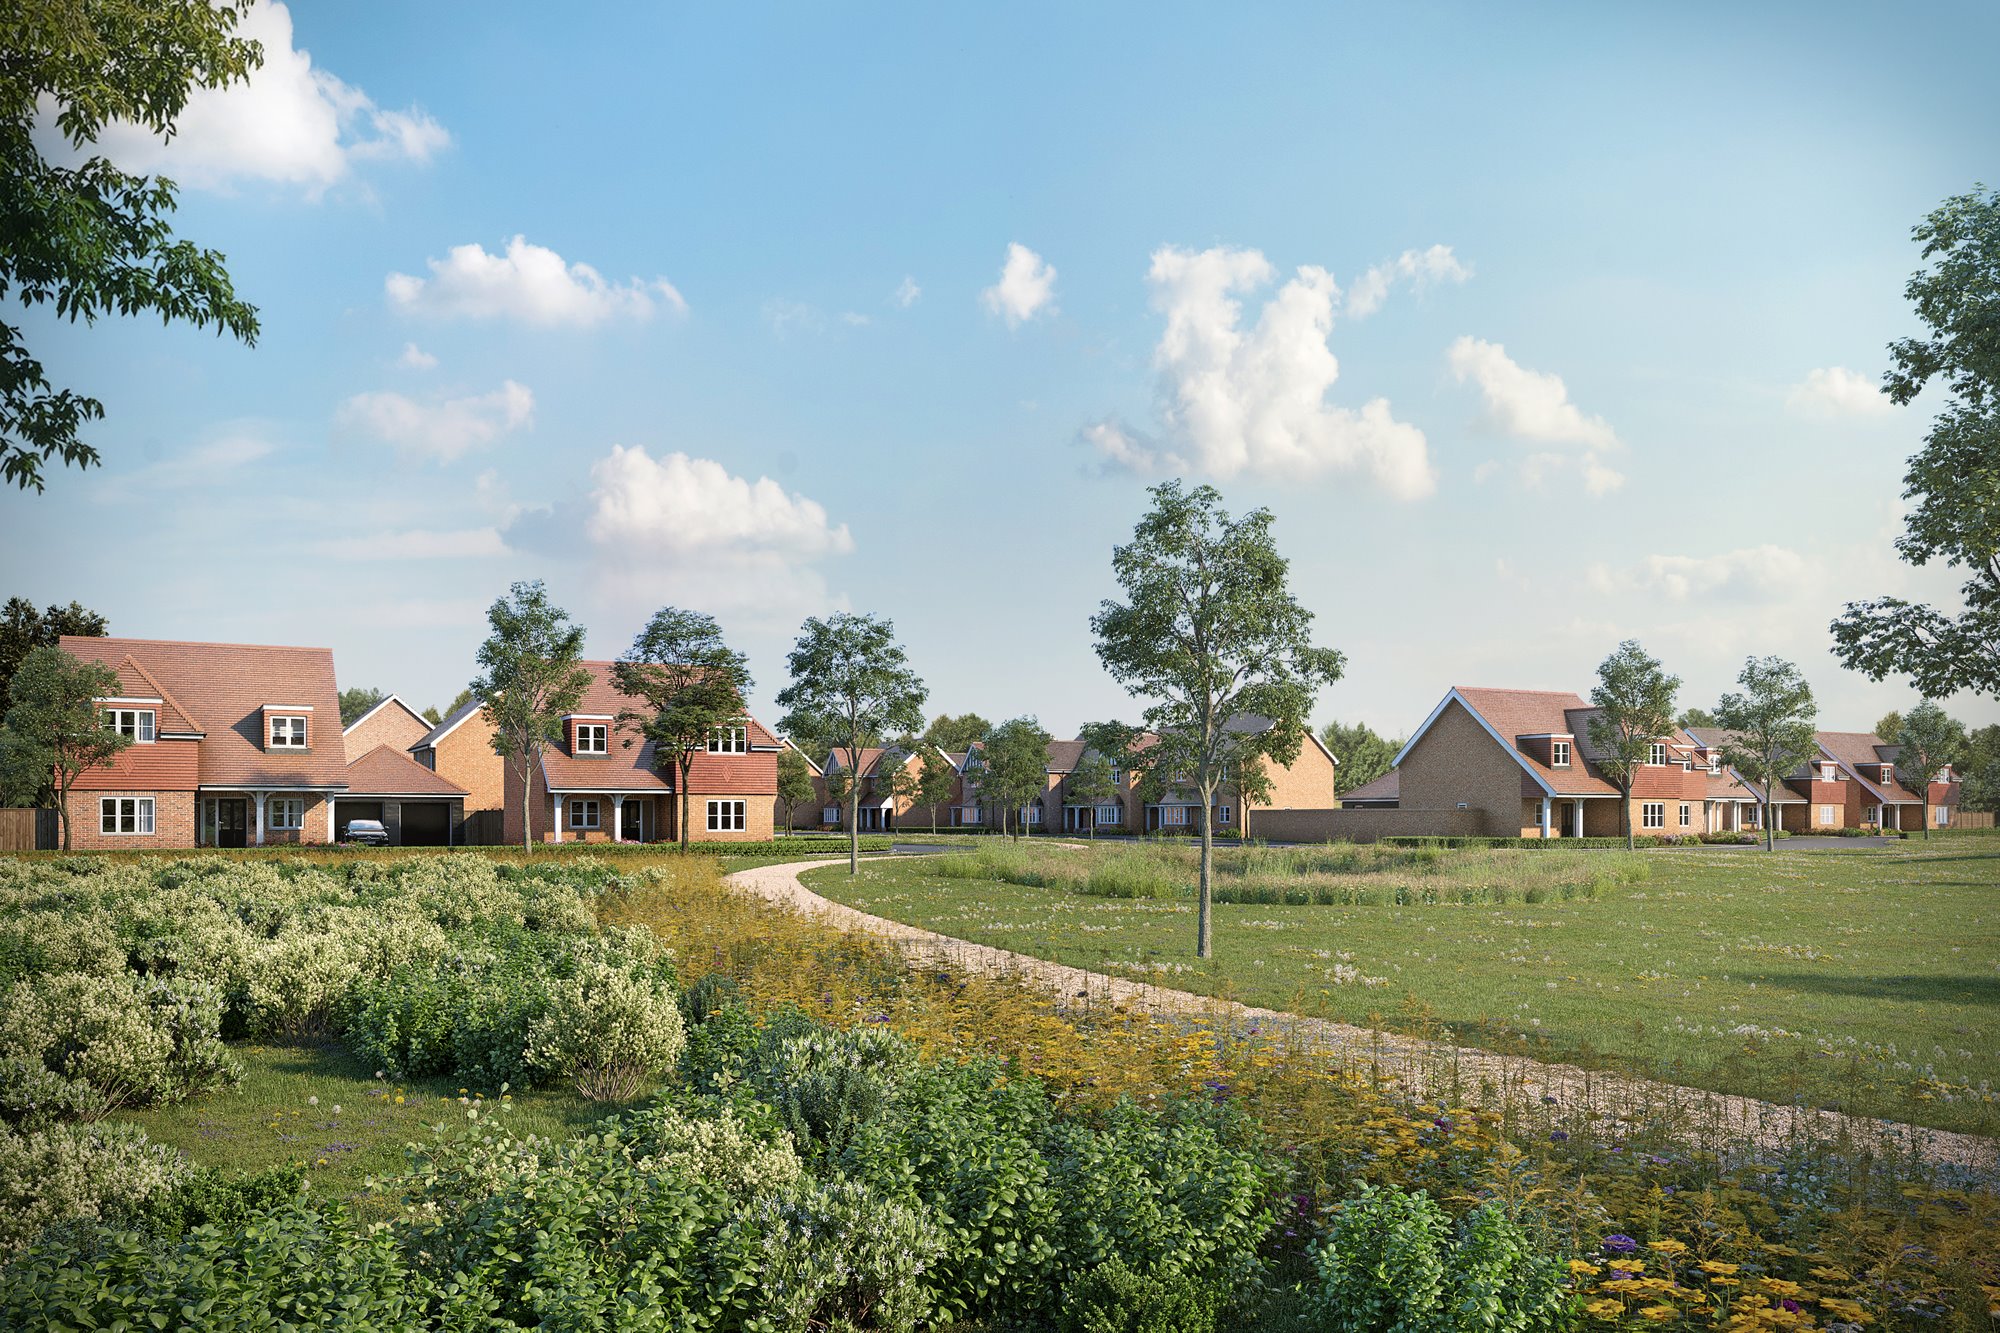 Announcing our first homes in St Albans!